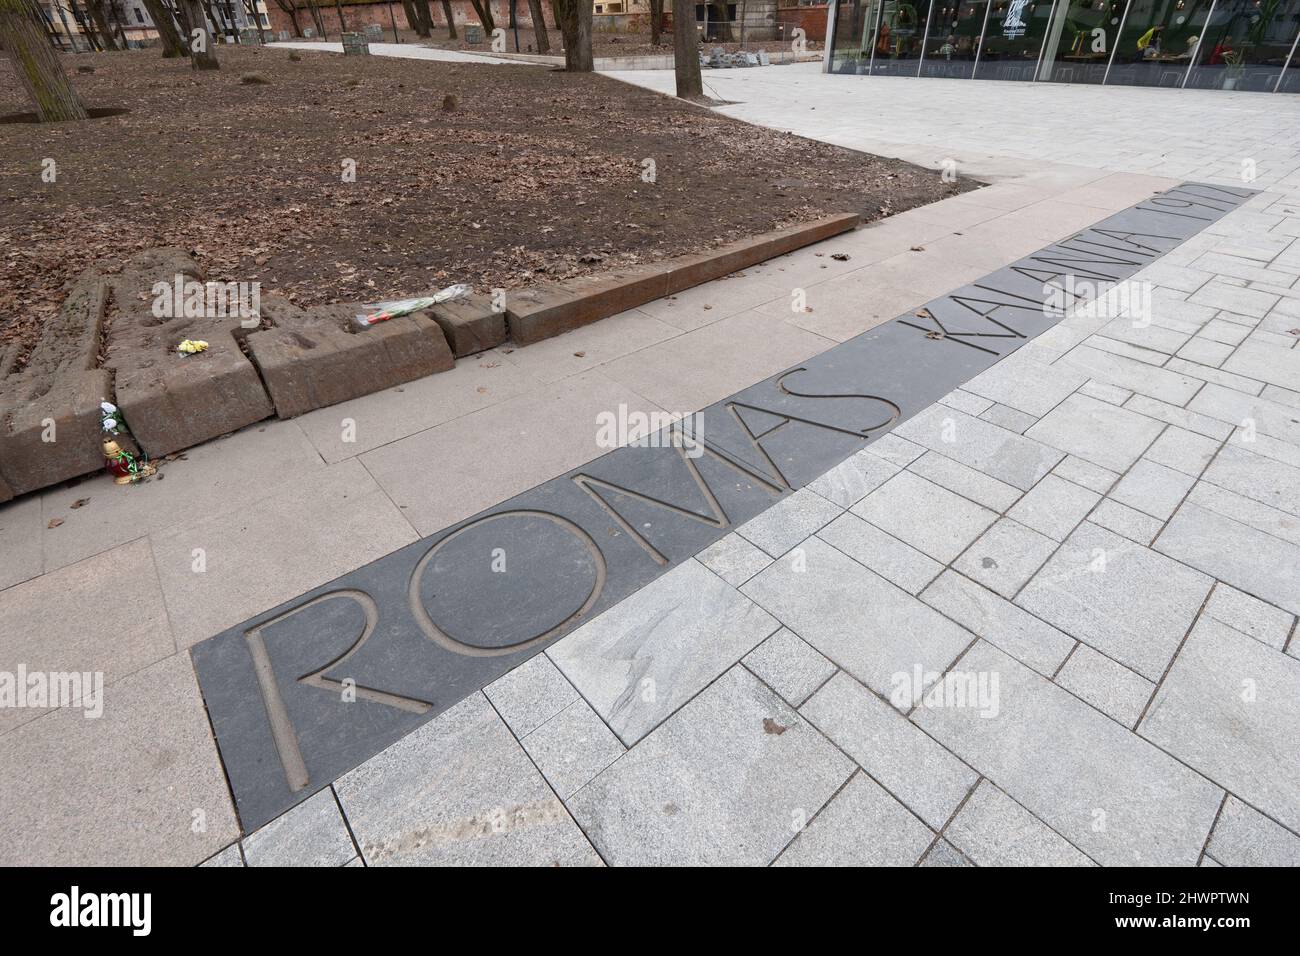 Romas Kalanta memorial.Kaunas second-largest city in Lithuania .Important centre of Lithuanian economic, academic, cultural life. Picture Gary Roberts Stock Photo